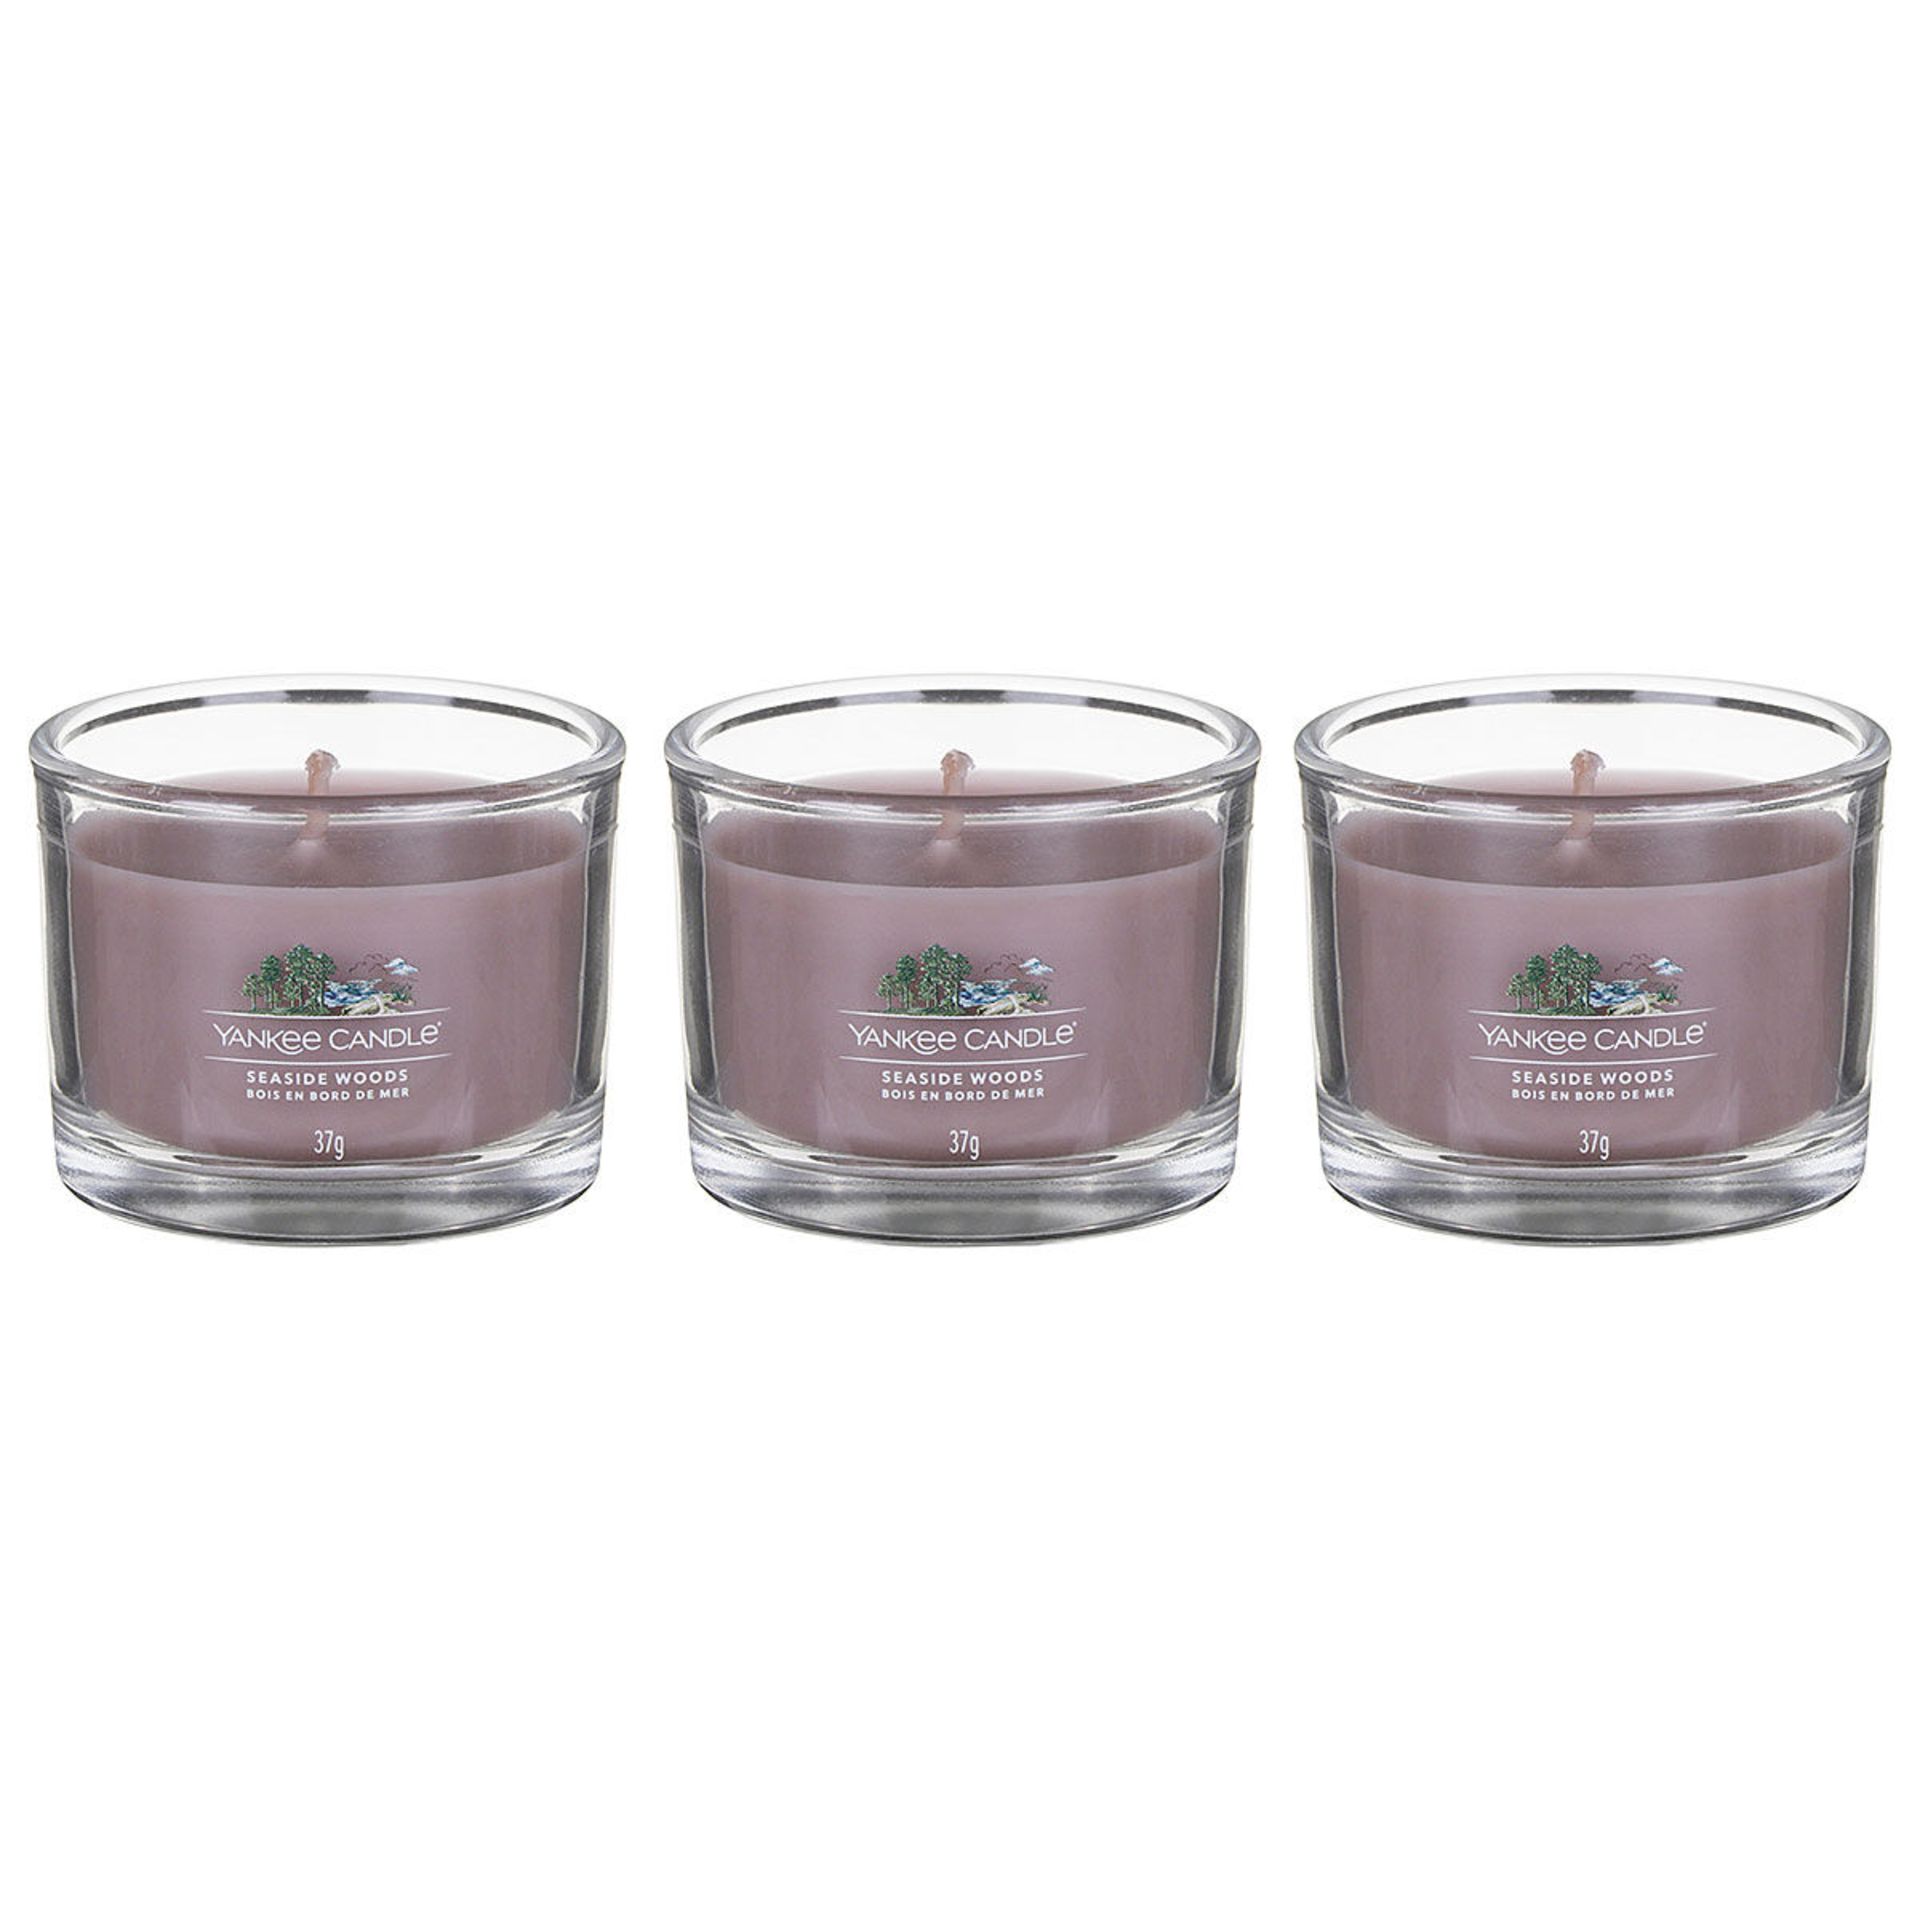 New Set Of Three 37g Scented Yankee Candles, Seaside Woods